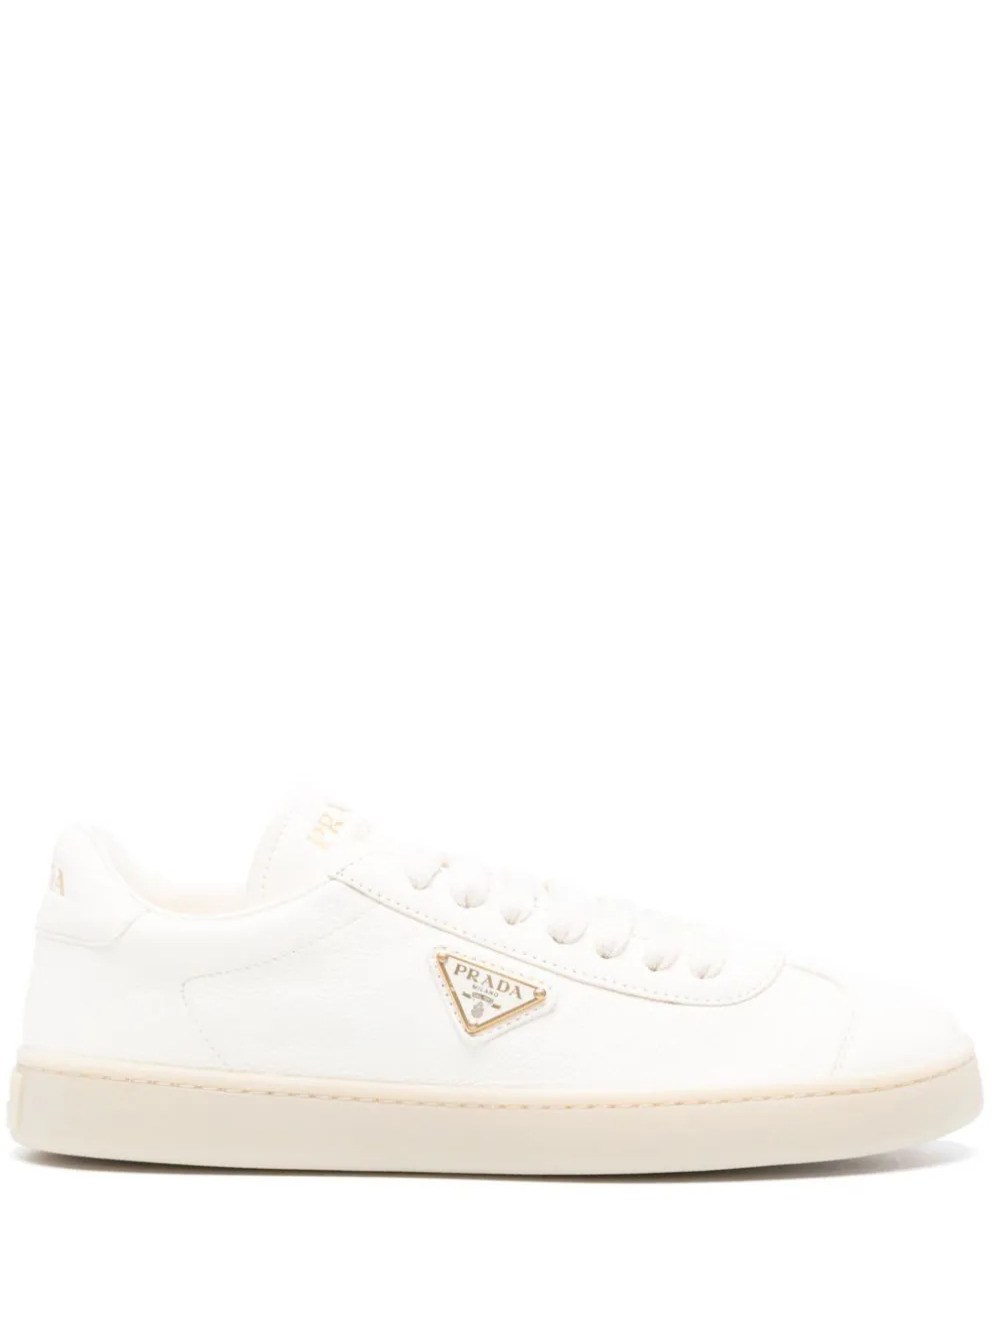 Leather low trainers Prada White size 44 EU in Leather - 39131926